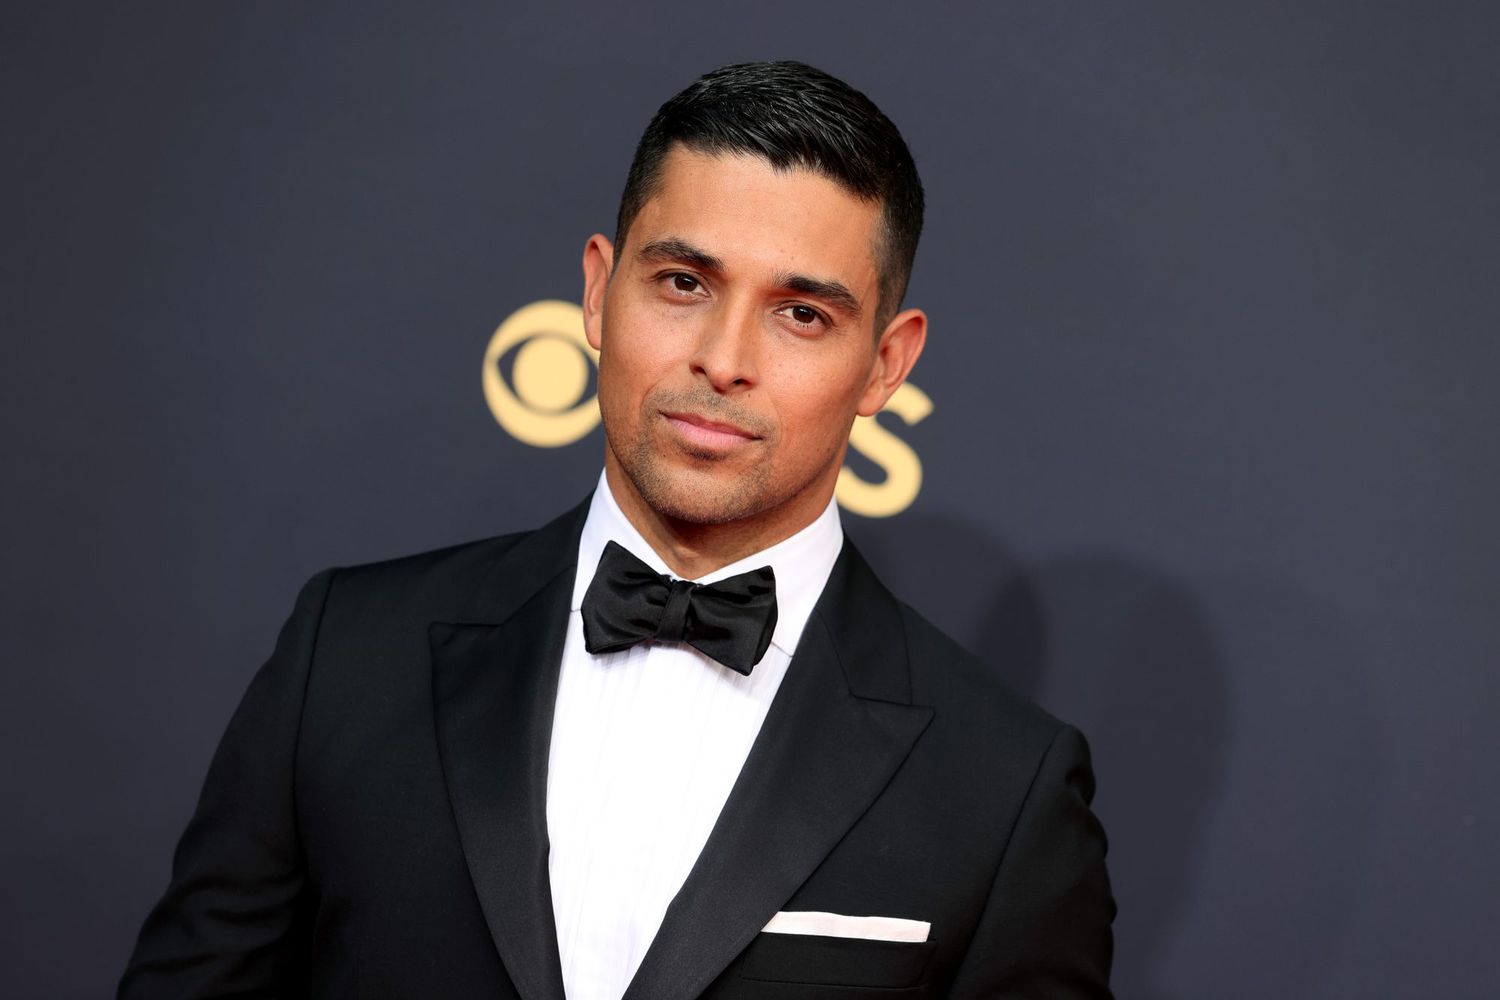 Wilmer Valderrama poses in the press room during the 73rd Primetime Emmy Awards at L.A. LIVE on September 19, 2021 in Los Angeles, California